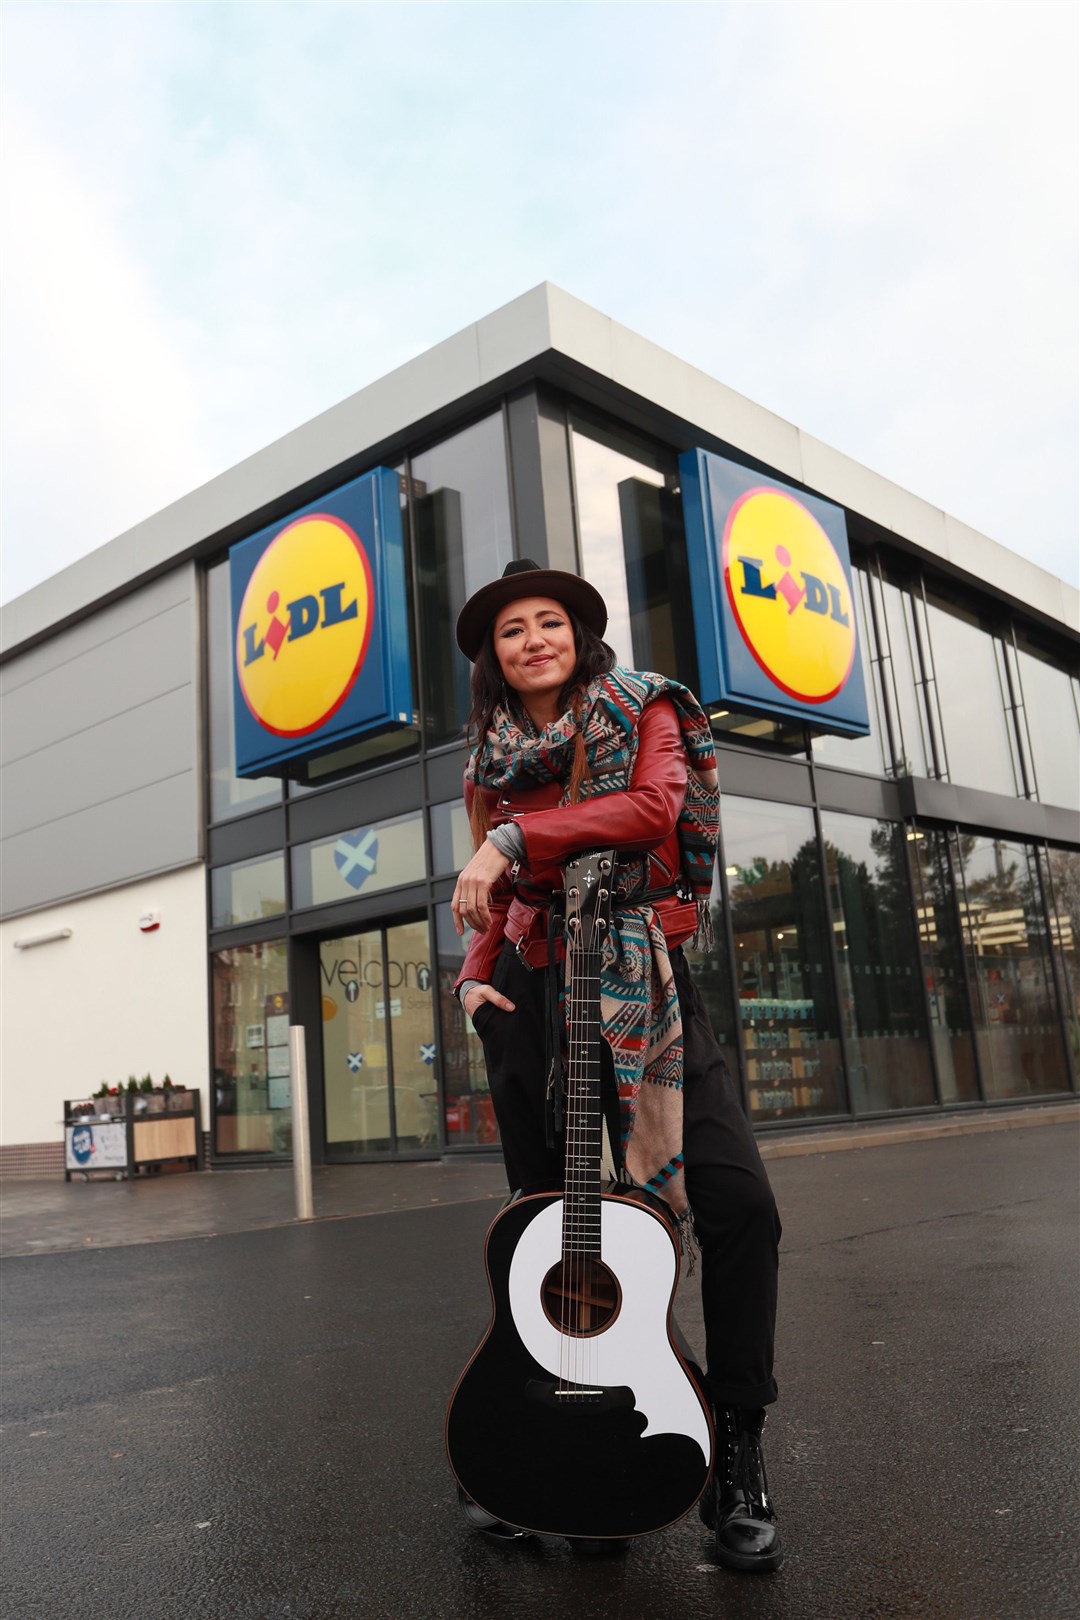 KT Tunstall has hooked up with Lidl. Picture by Stewart Attwood